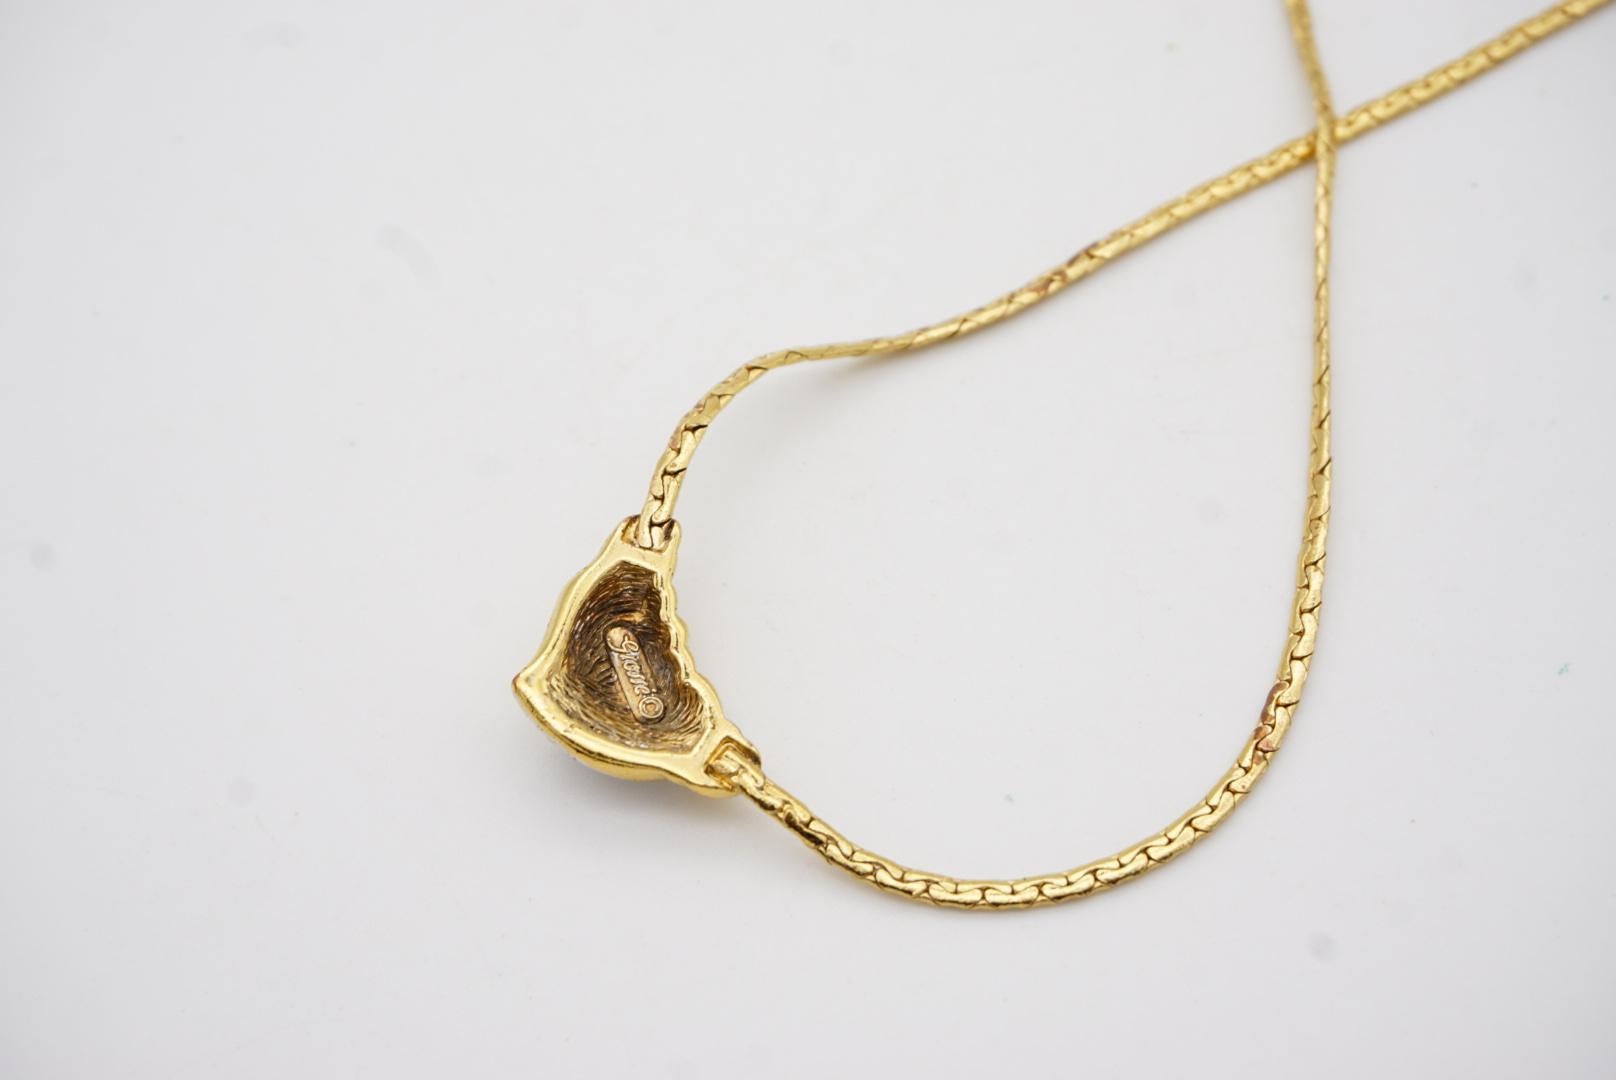 Christian Dior GROSSE 1970s Vintage Crystals Silver Gold Heart Pendant Necklace For Sale 6